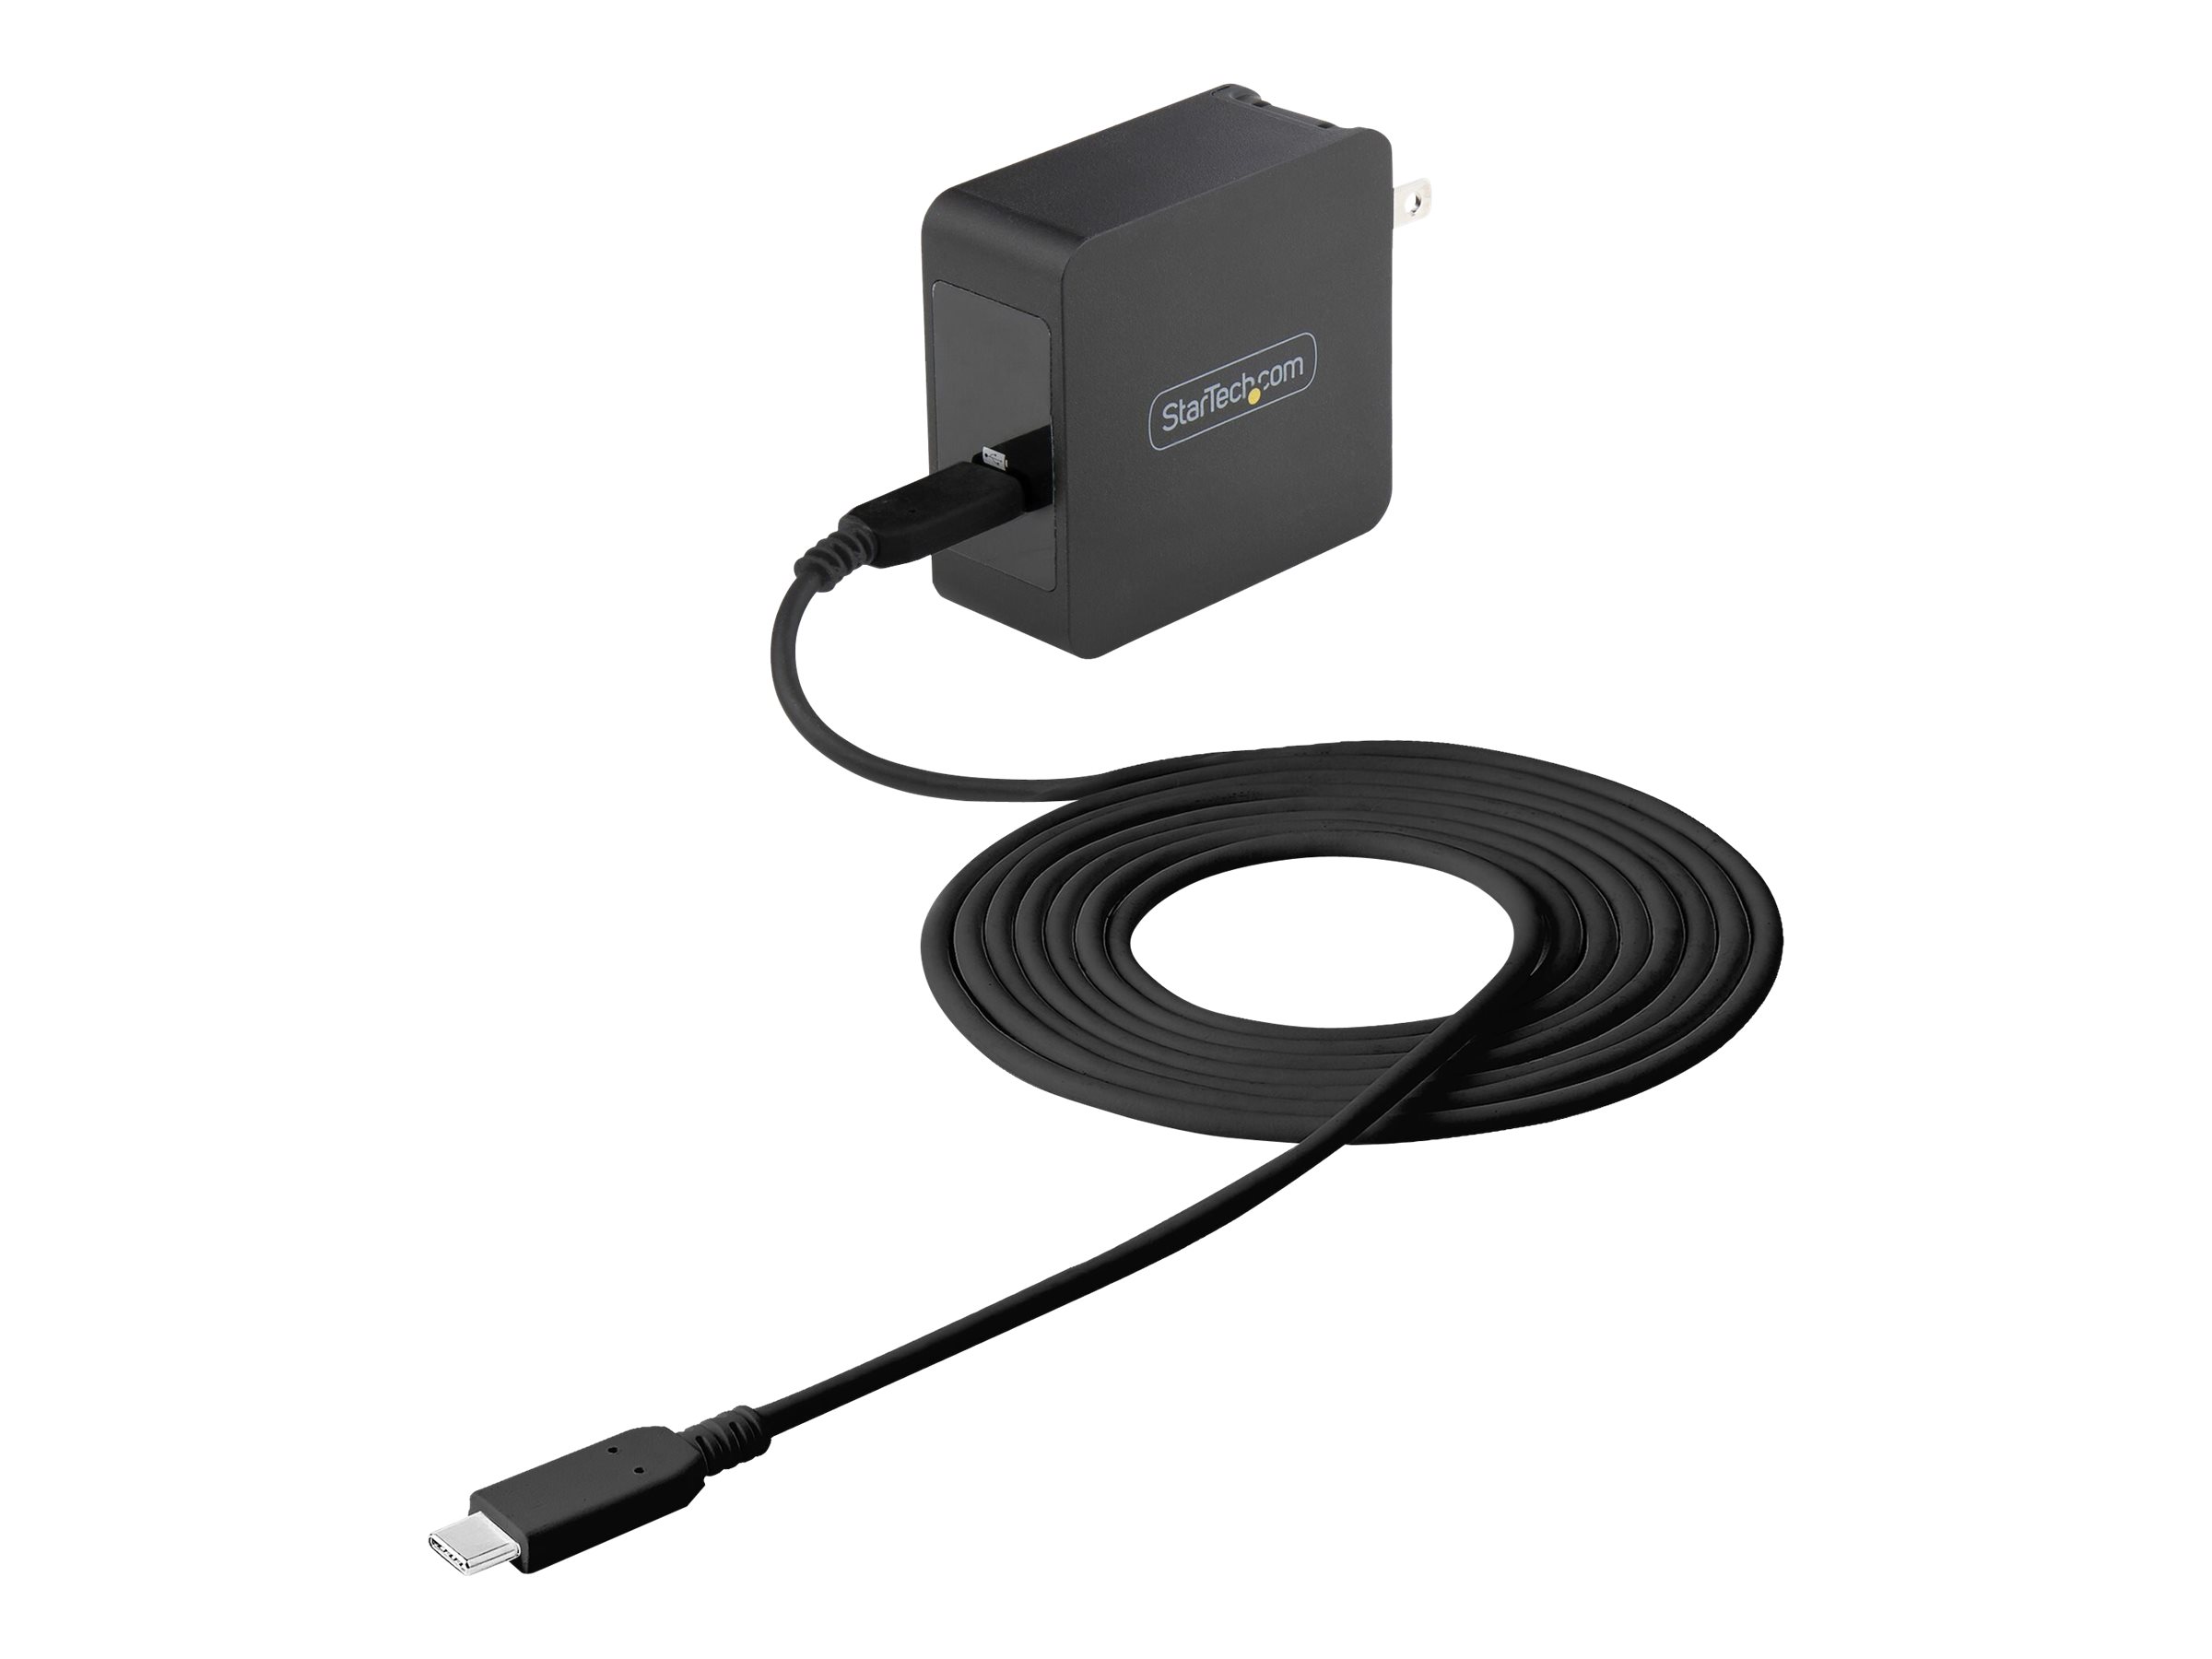  USB C Wall Charger, USB C Laptop Charger 60W PD, 6ft/2m Cable,  Universal Compact Type C Power Adapter, Dell XPS, Lenovo X1 Carbon, HP  EliteBook, MacBook, USB IF/ETL Certified 